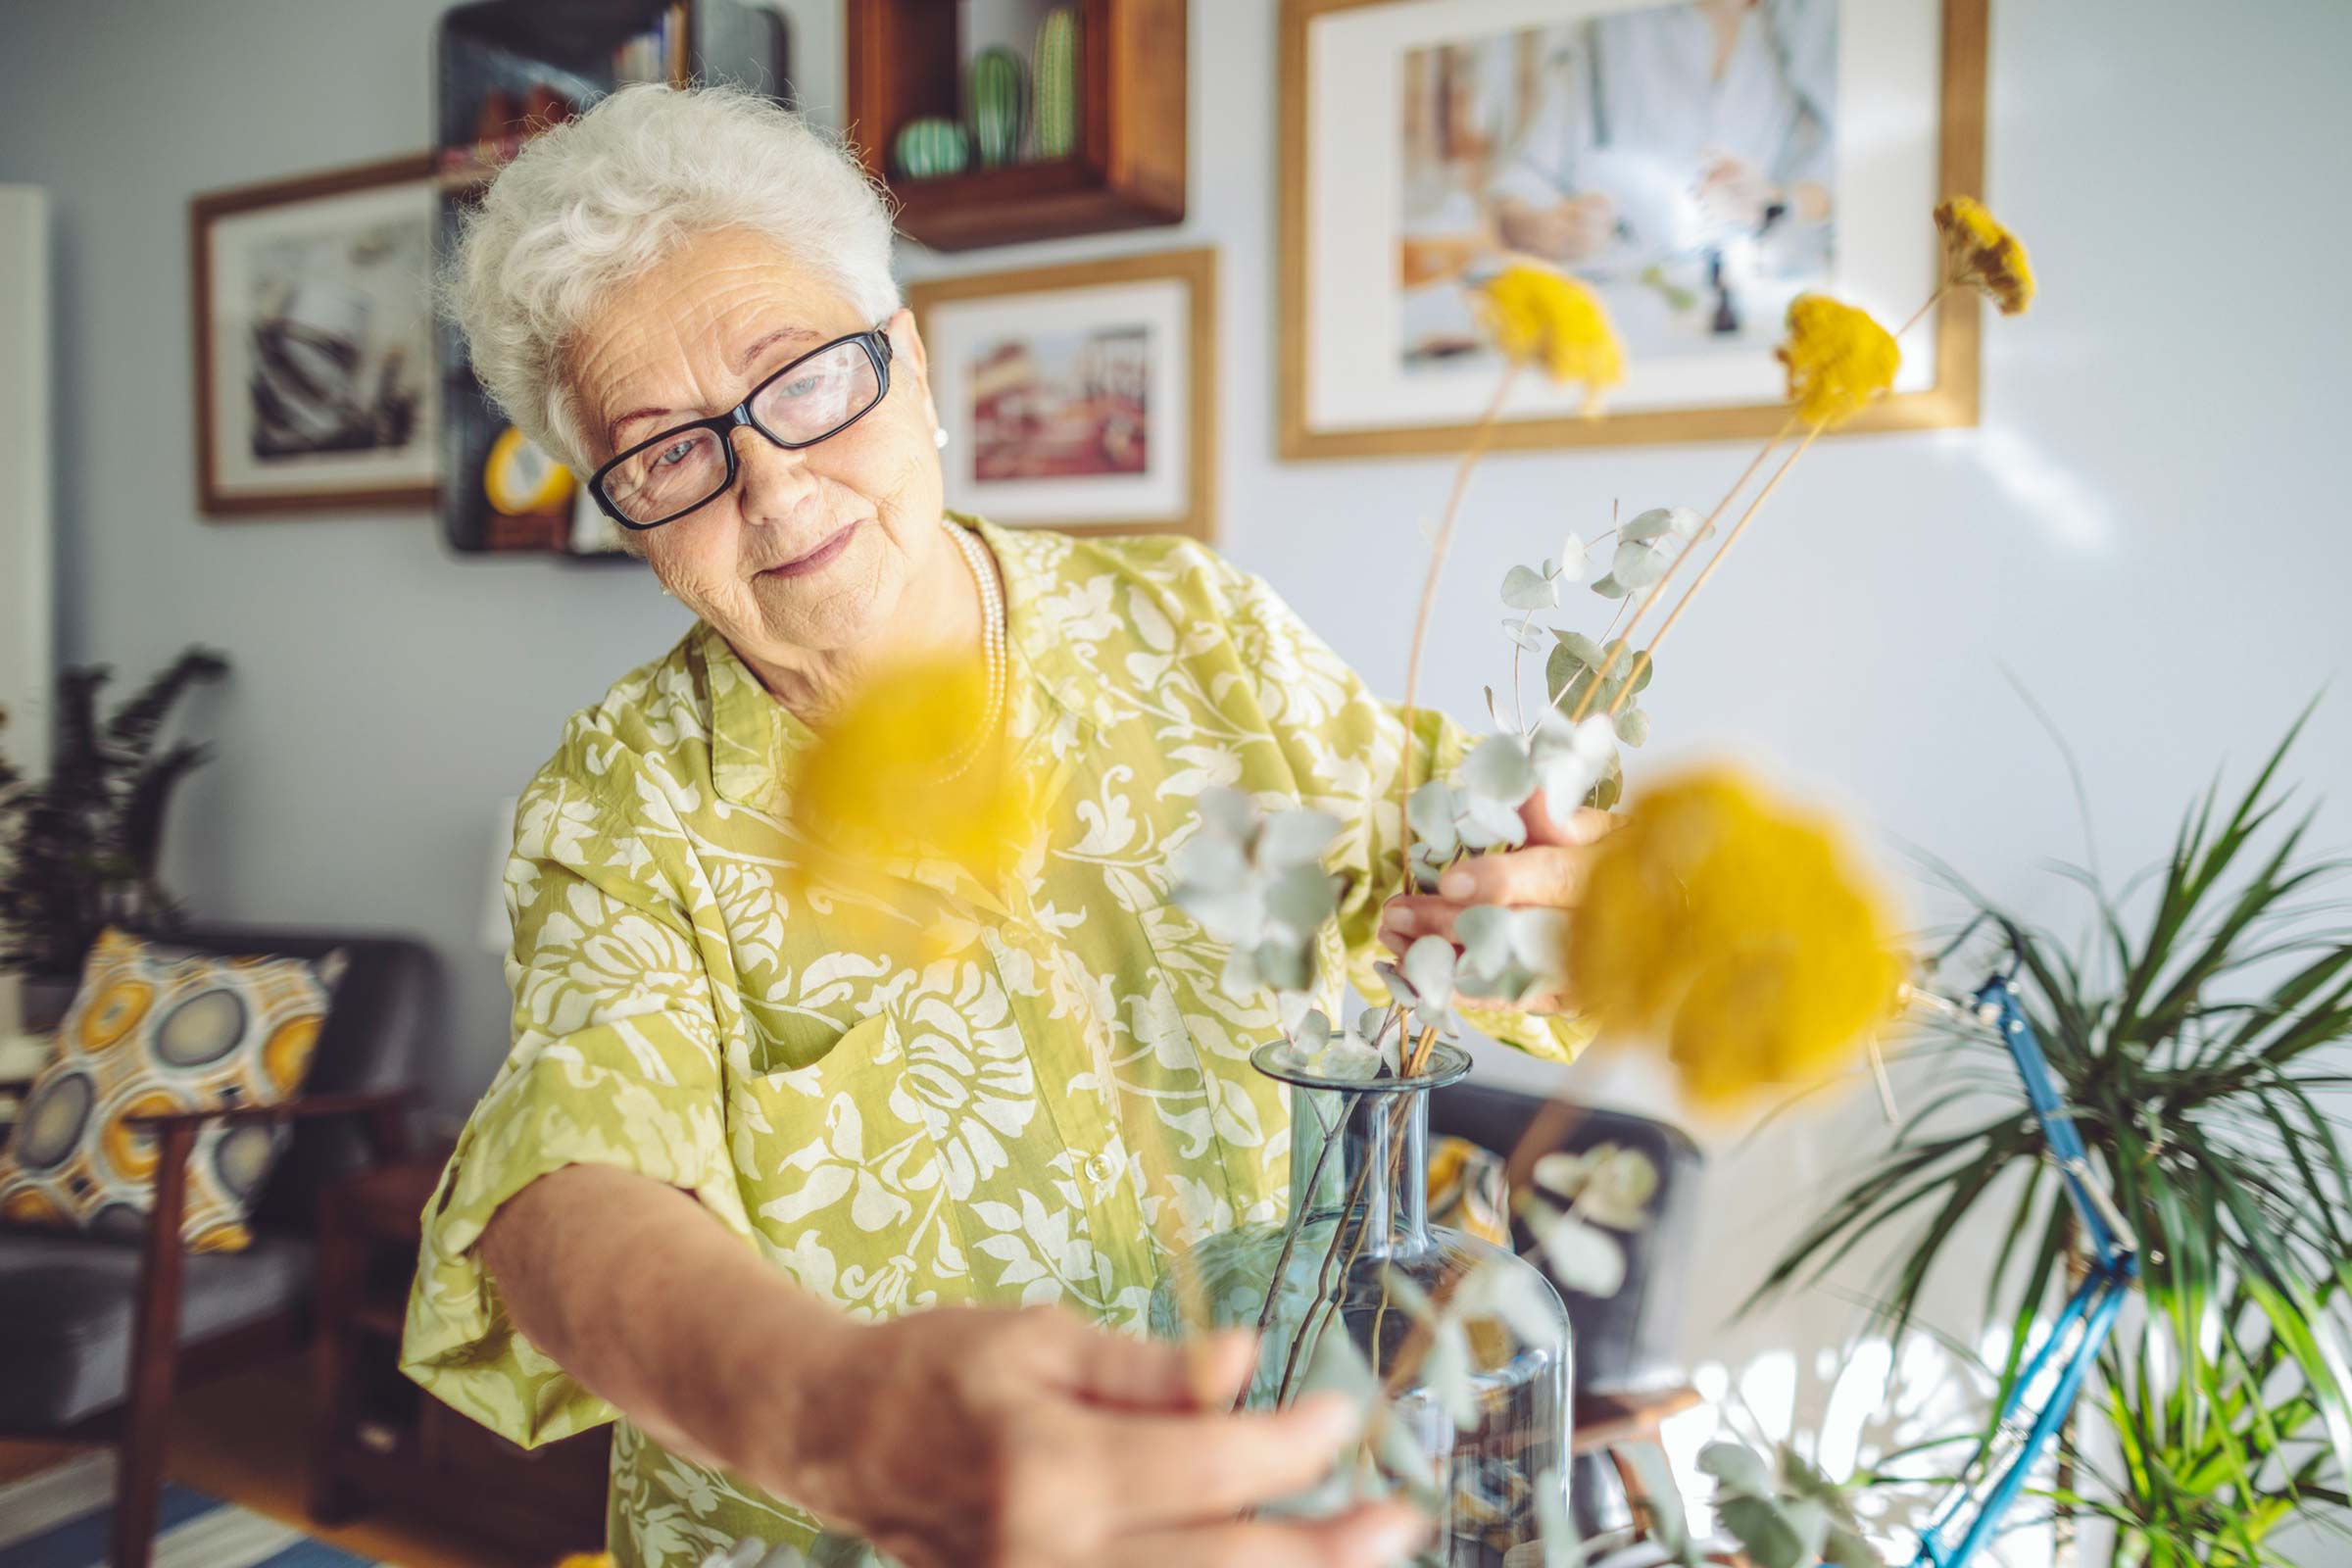 Female personal care resident arranging flowers